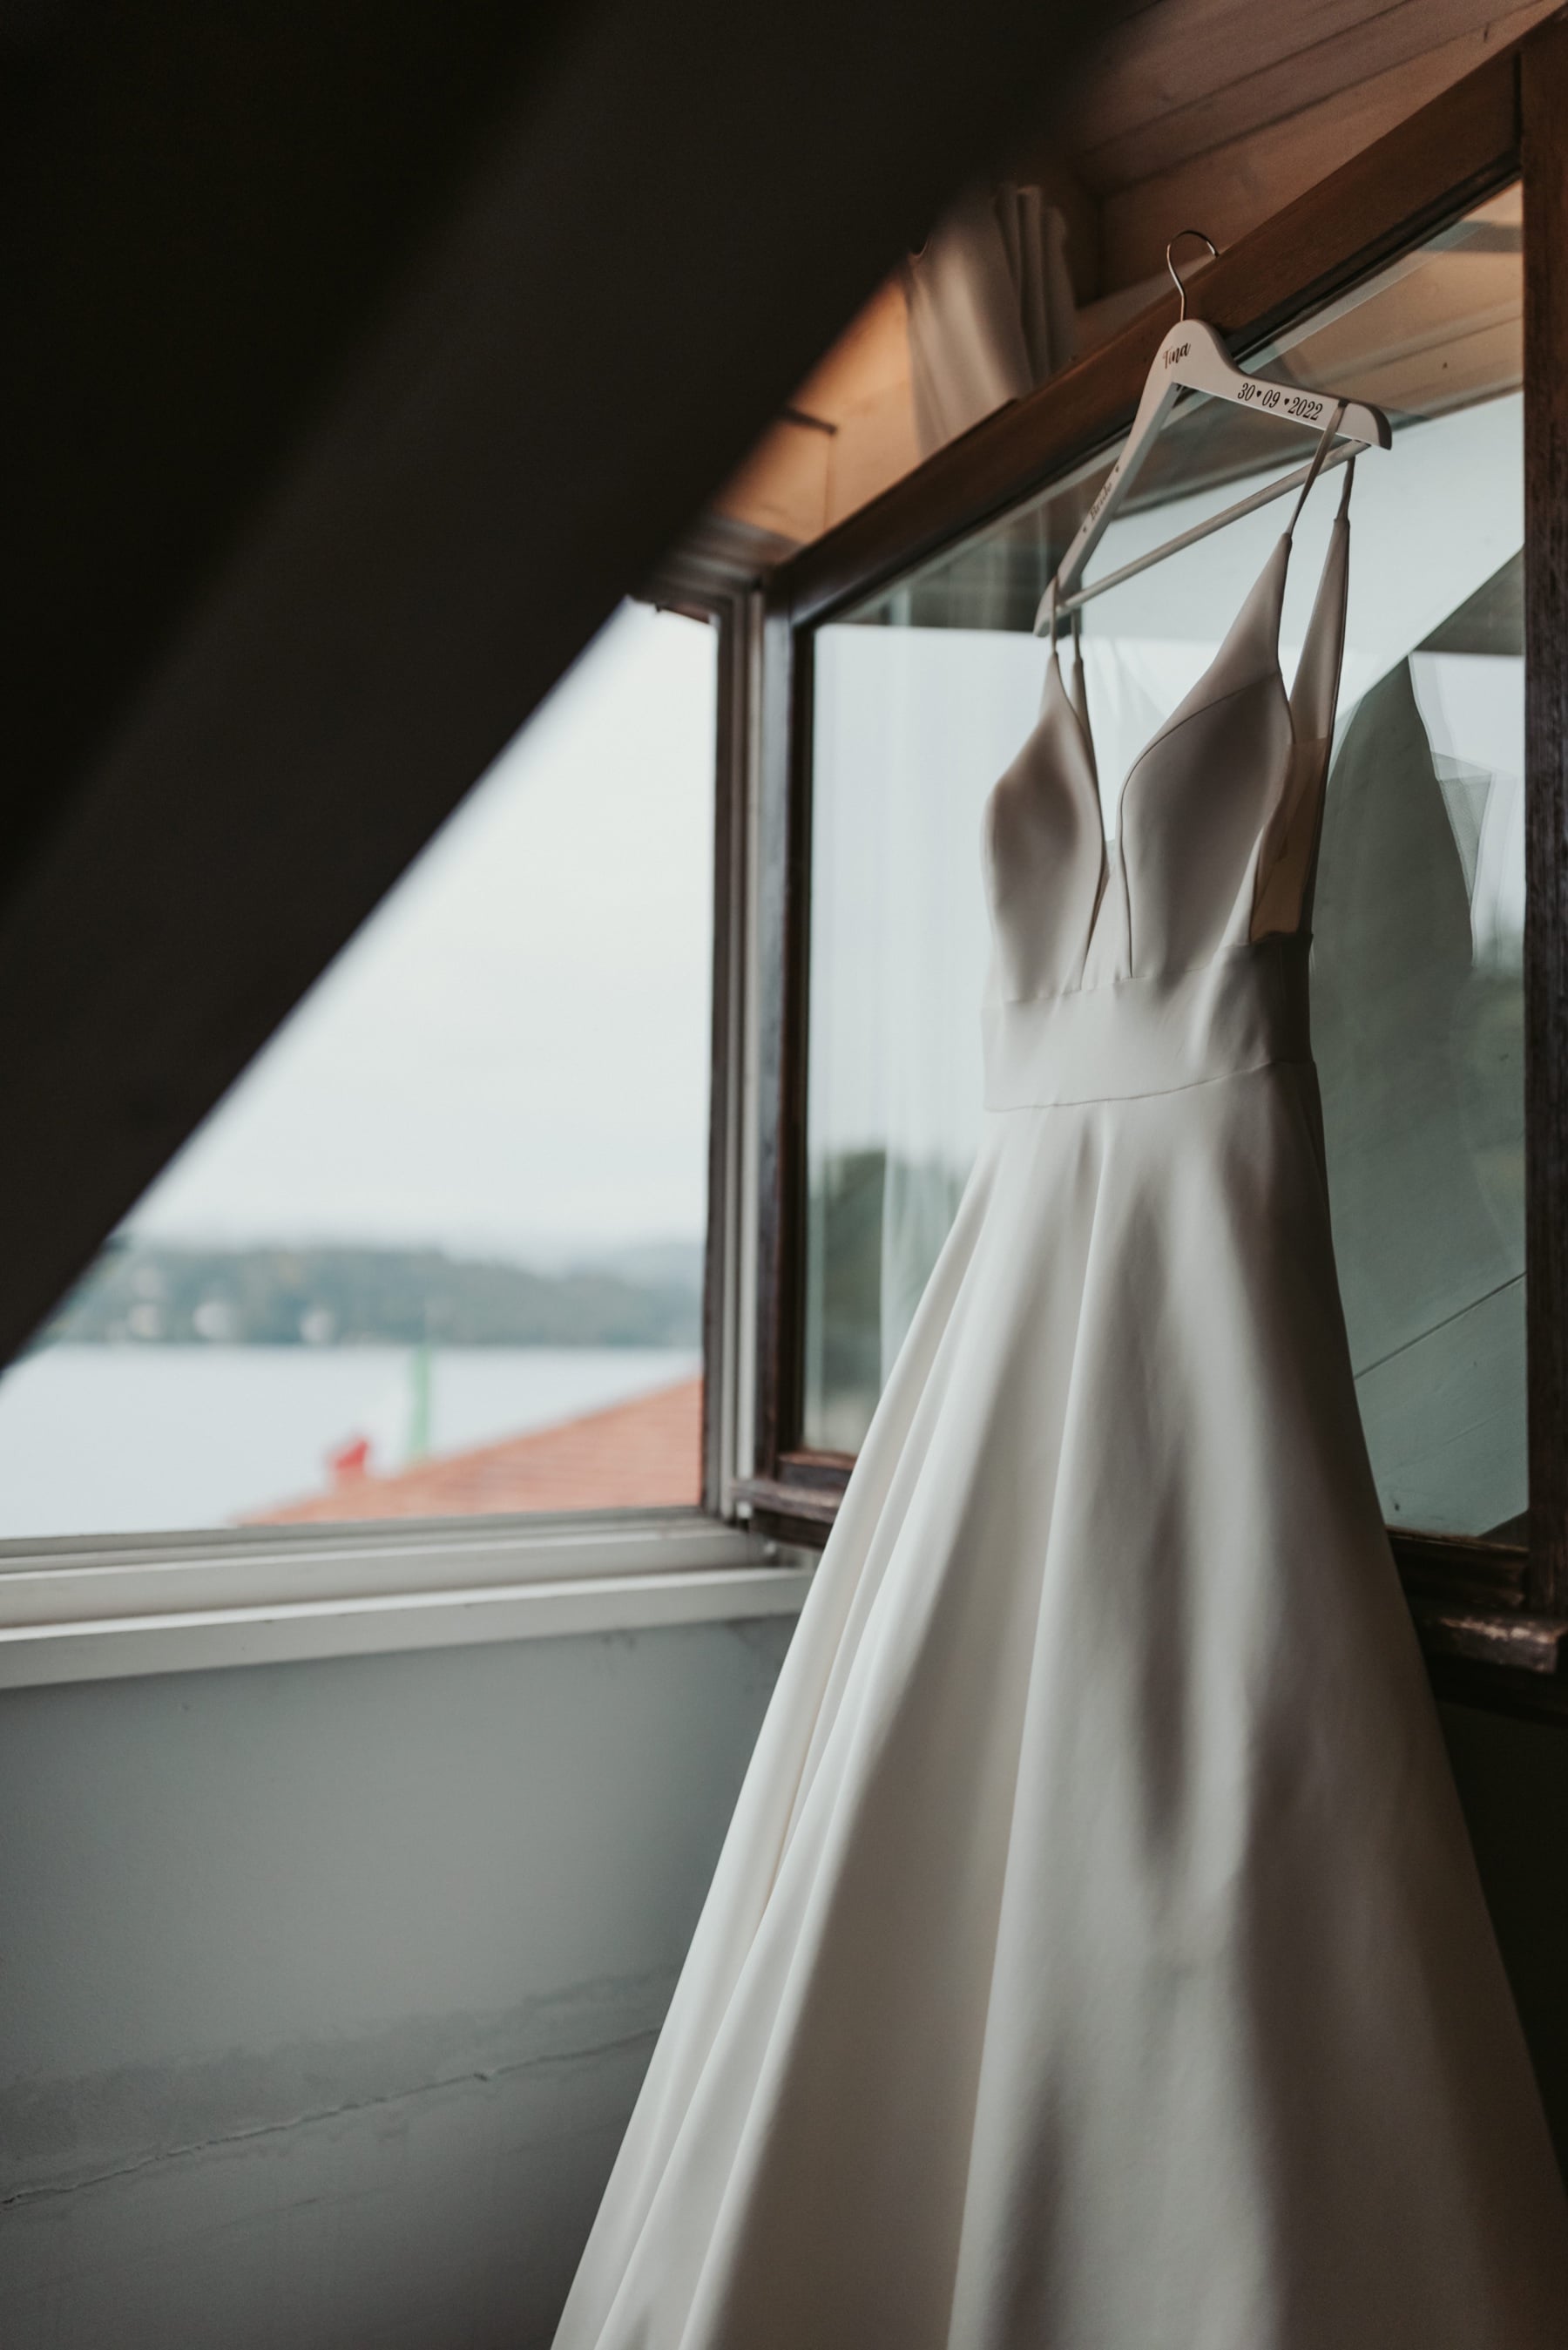 Bespoke destination wedding on the Lake Maggiore in Italy